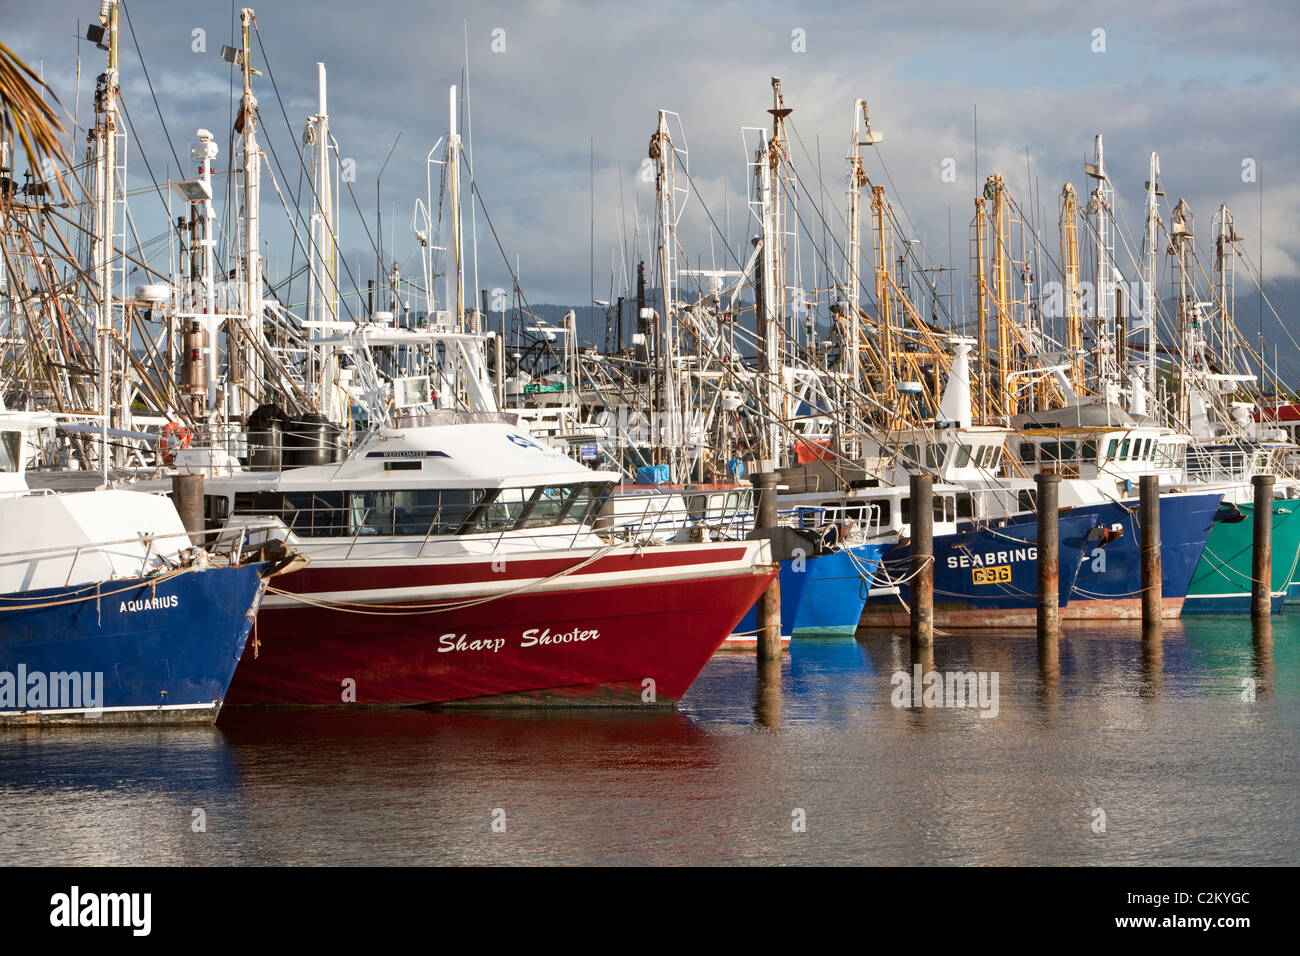 Fishing trawlers at Portsmith. Cairns, Queensland, Australia Stock Photo